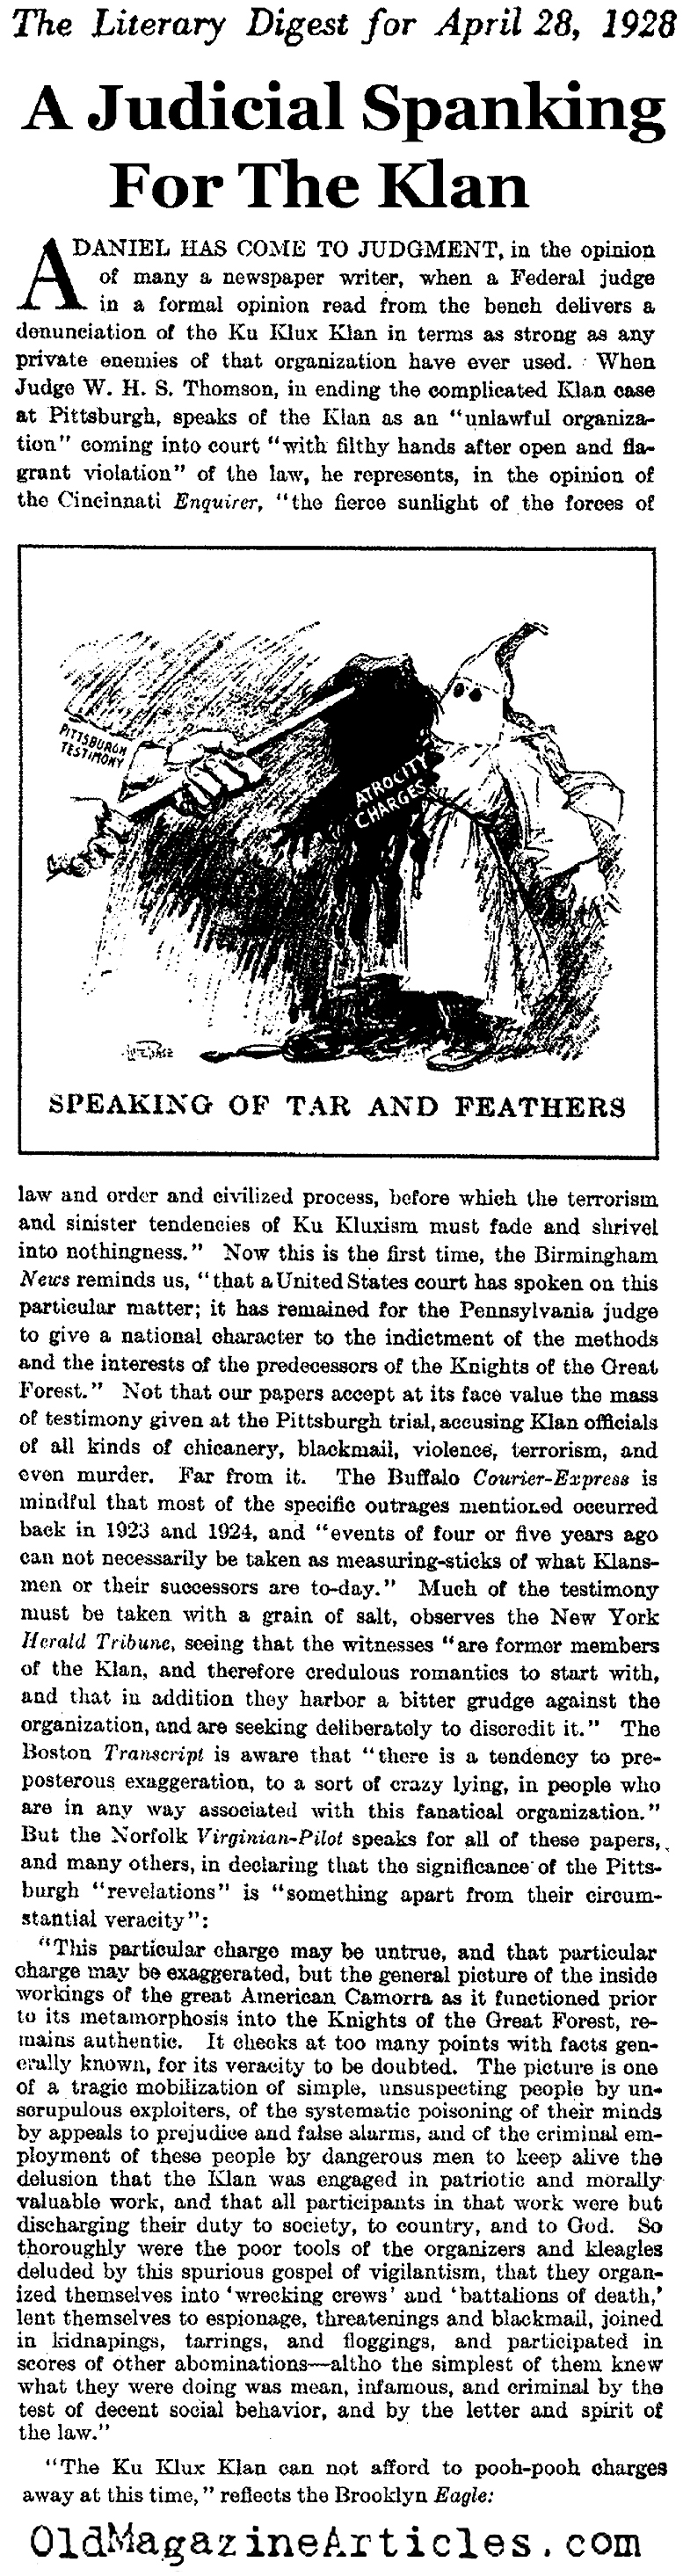 The KKK in Federal Court  (The Literary Digest, 1928)